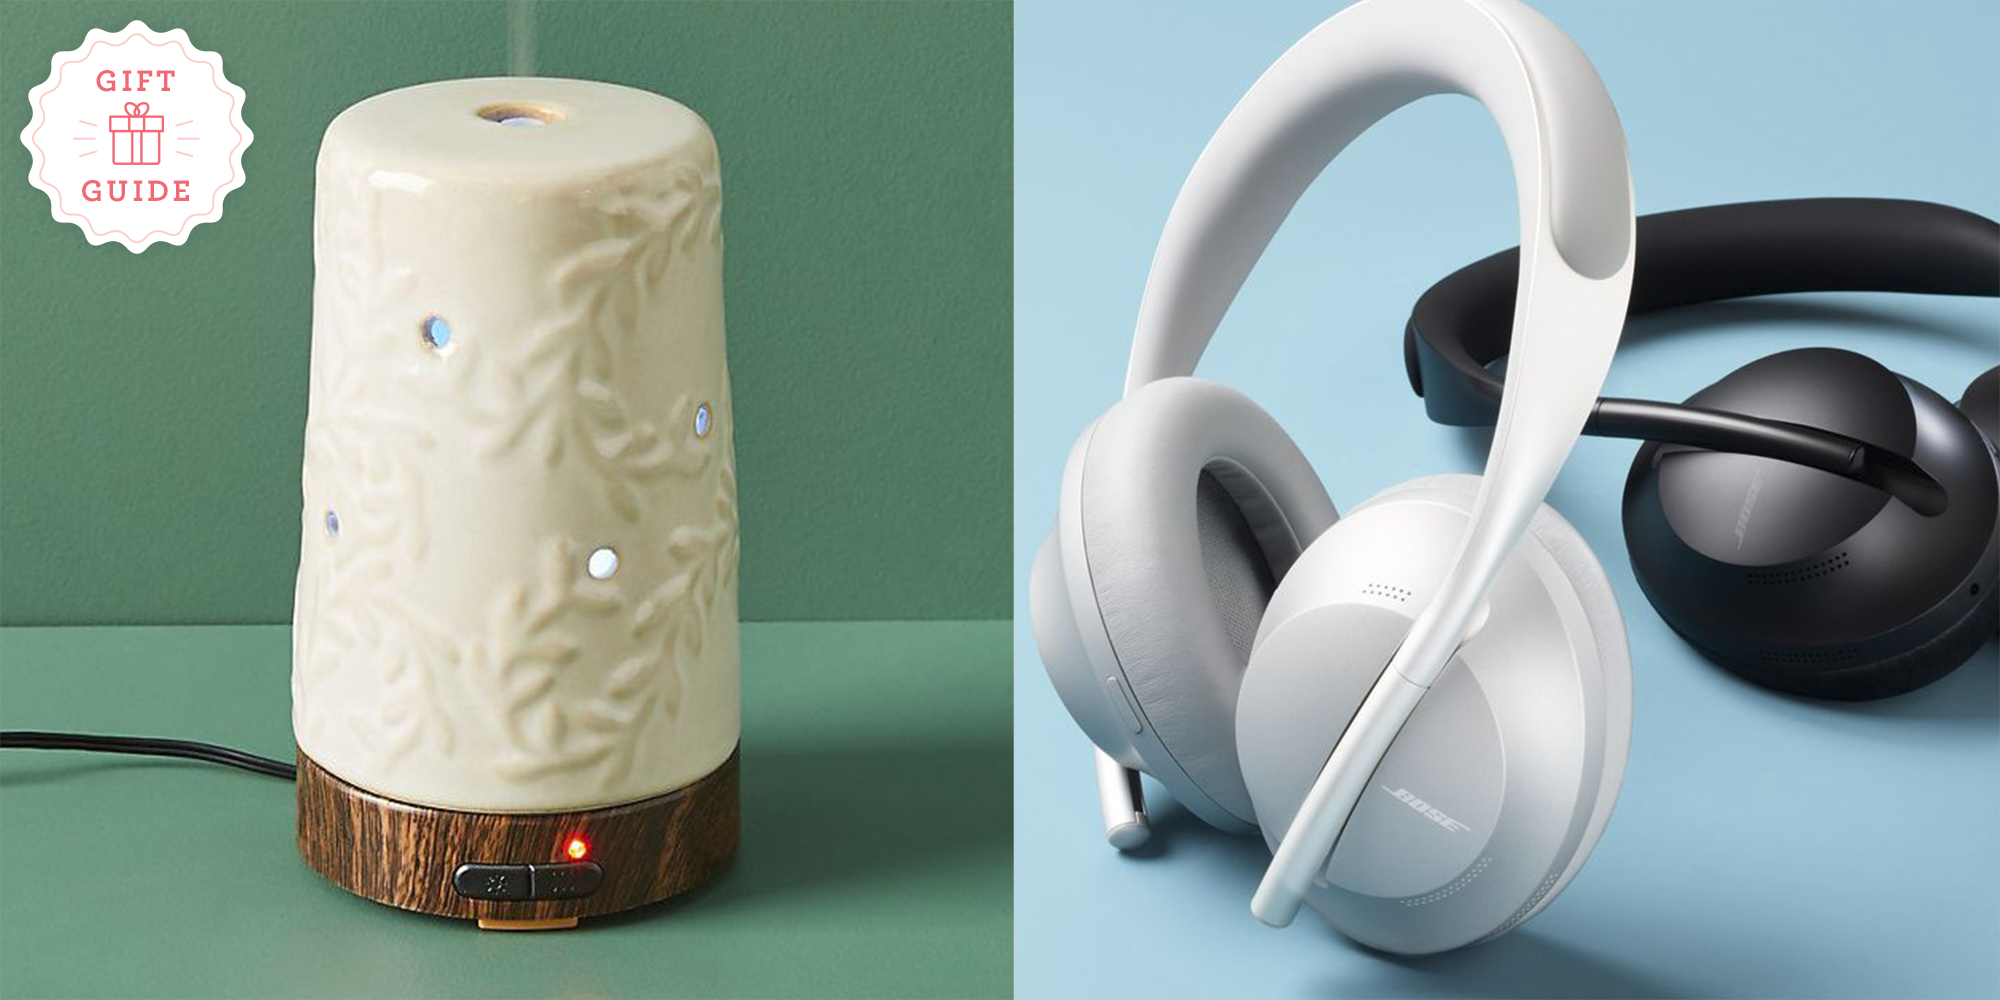 12 Best Stress-Relief Gifts: A Gift Guide for the Holiday Season